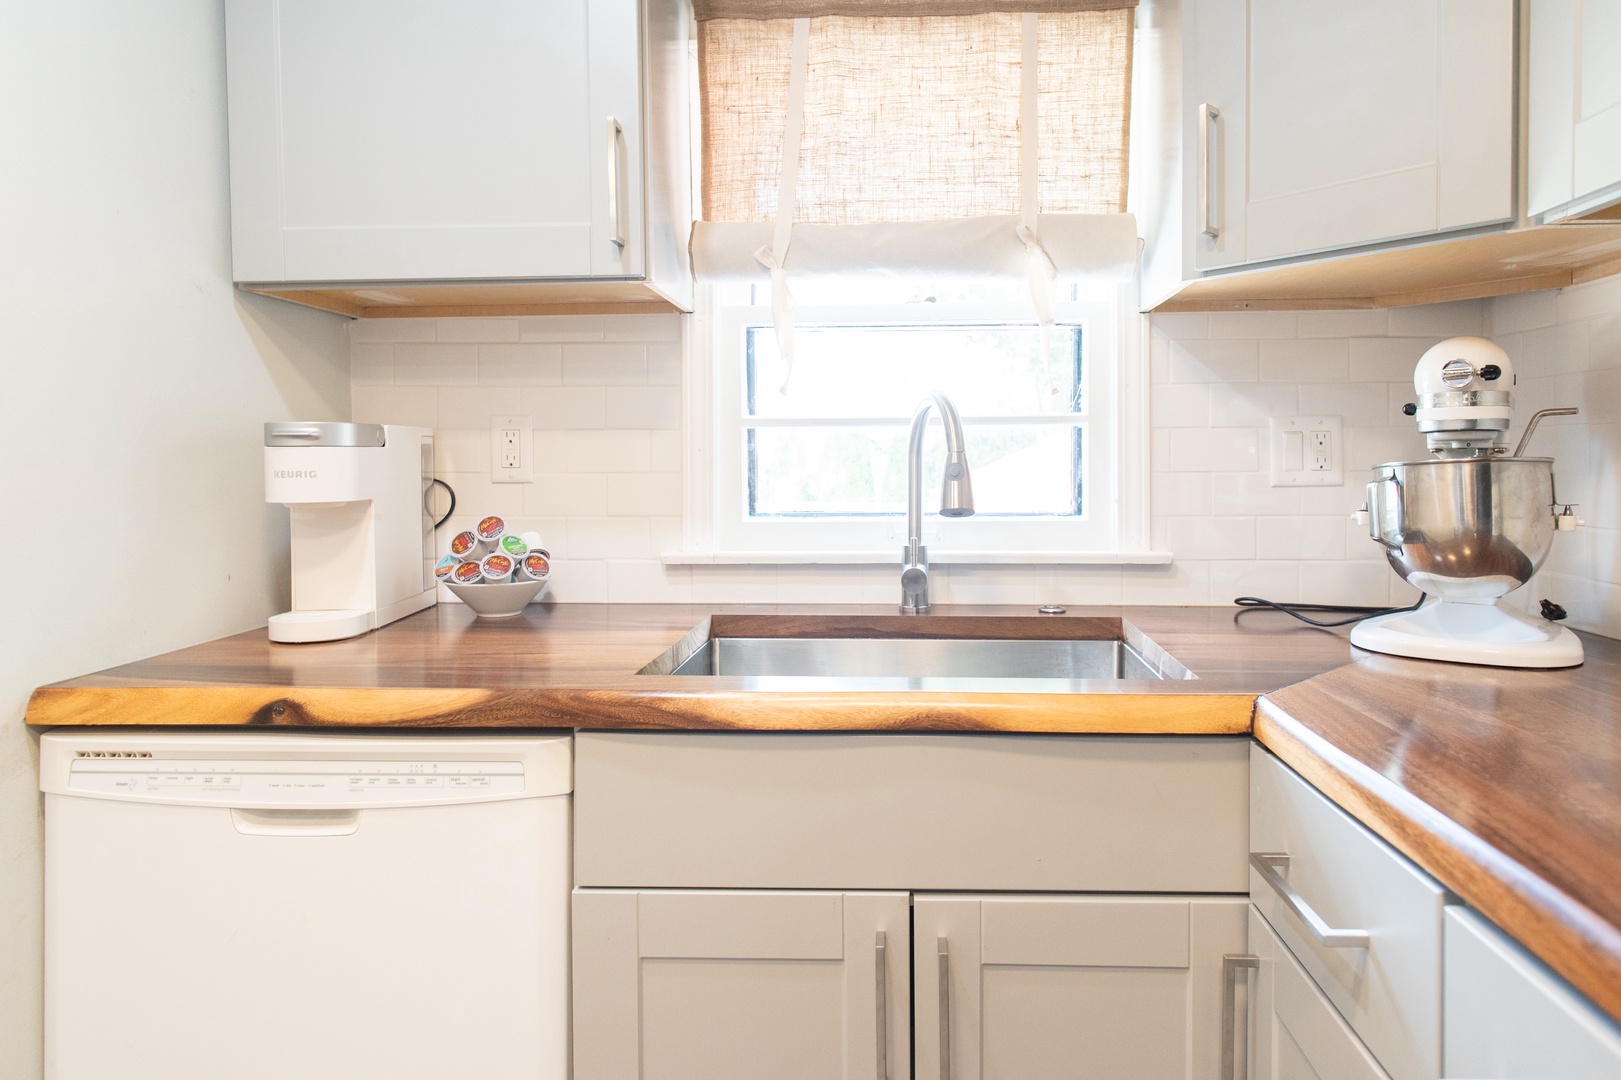 The apartment’s cozy kitchen offers ample space & all the comforts of home